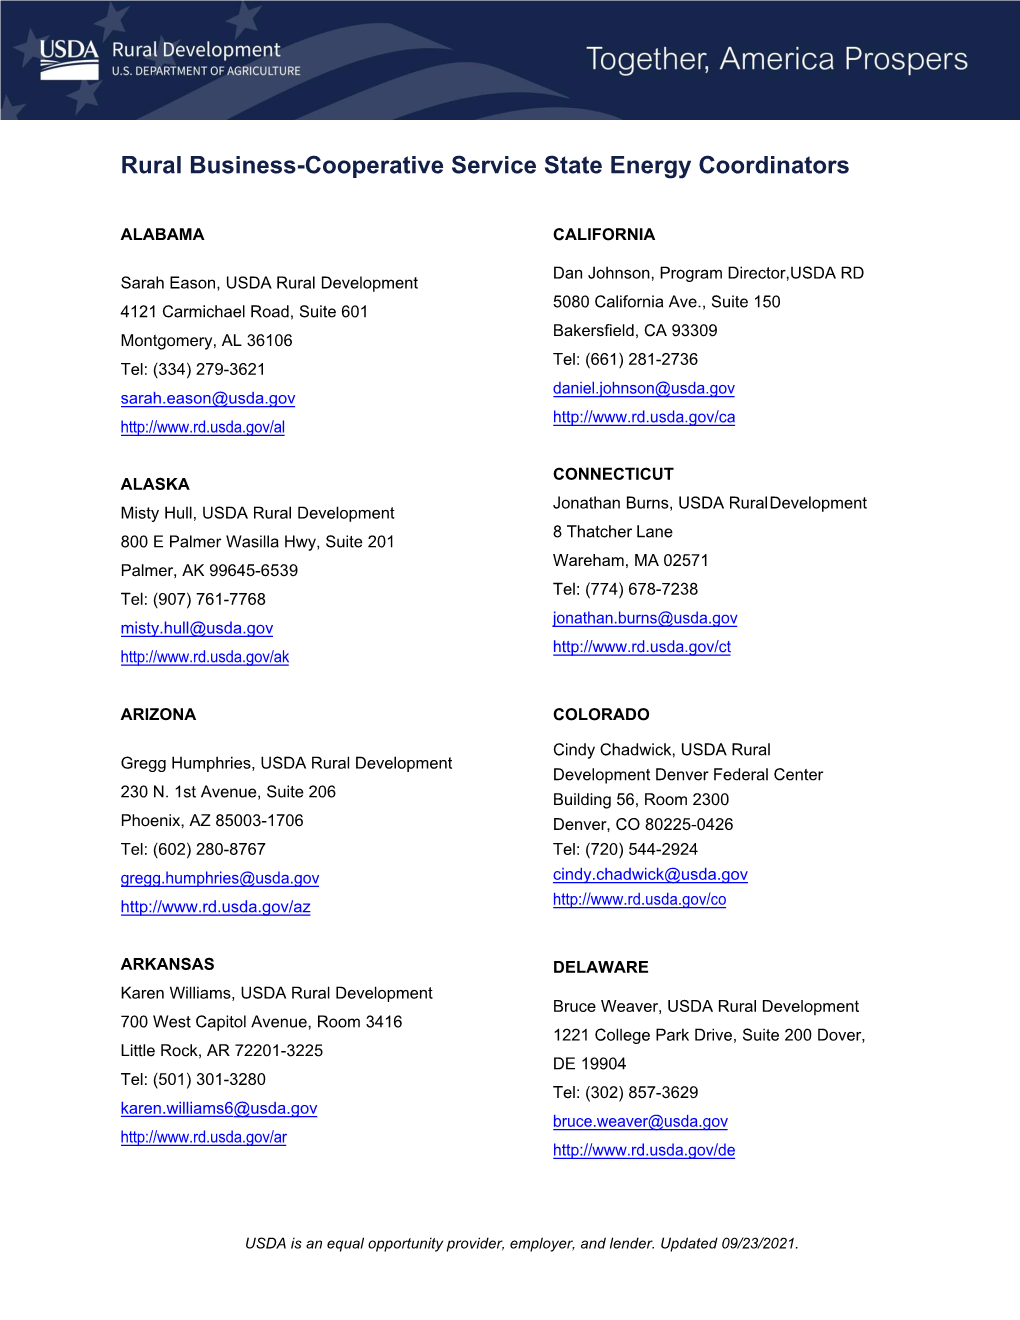 Rural Business-Cooperative Service State Energy Coordinators